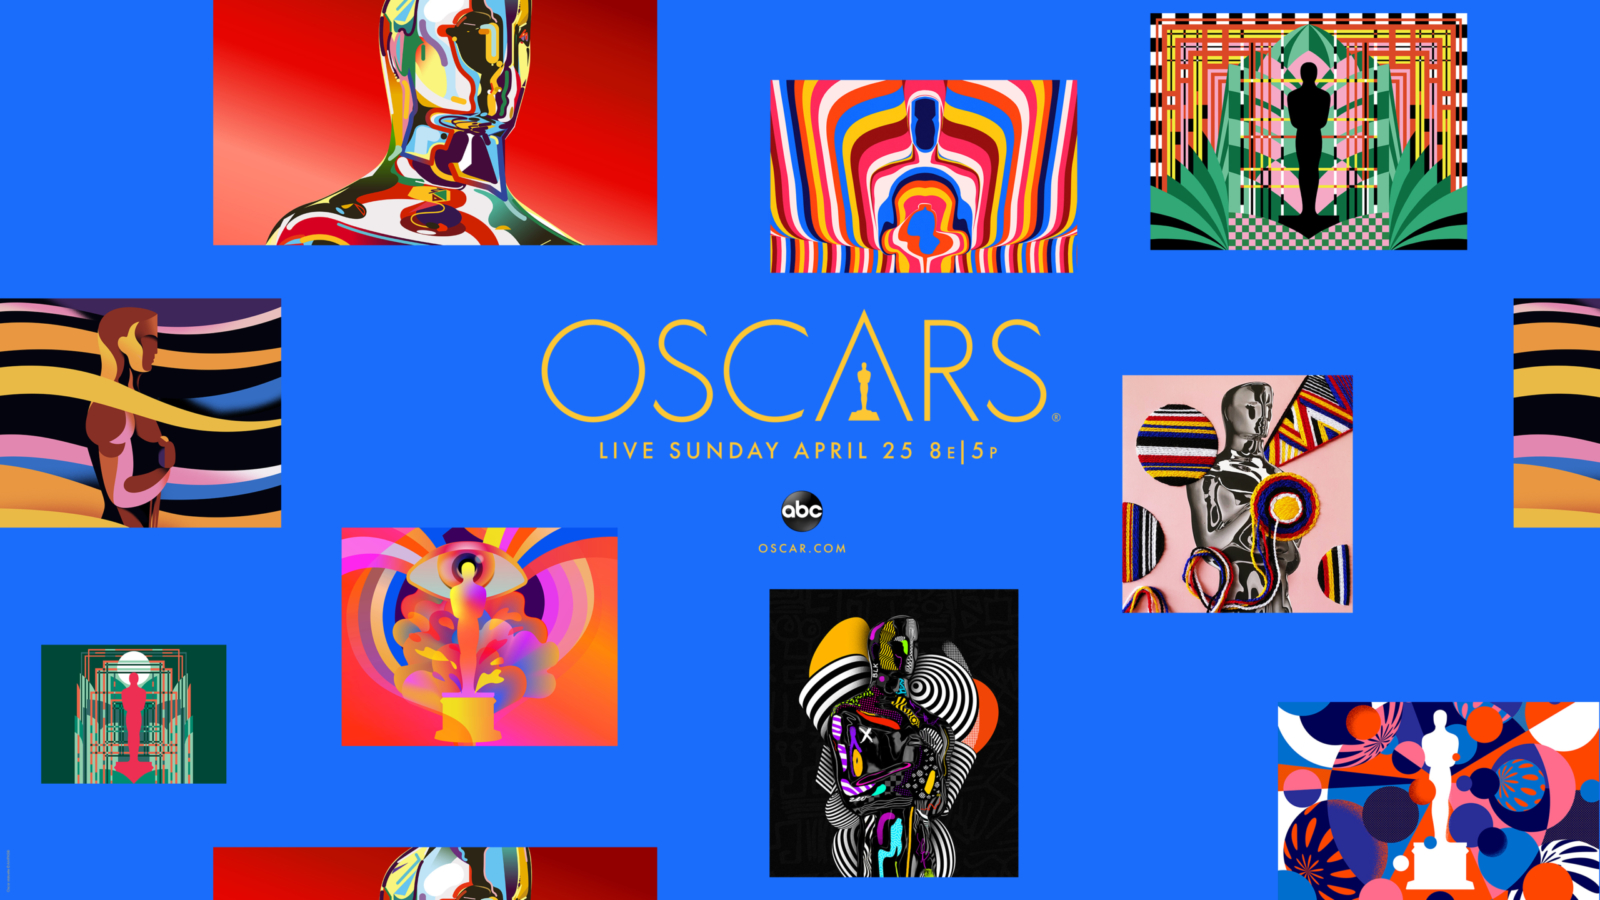 Oscars 2021: The Nominations